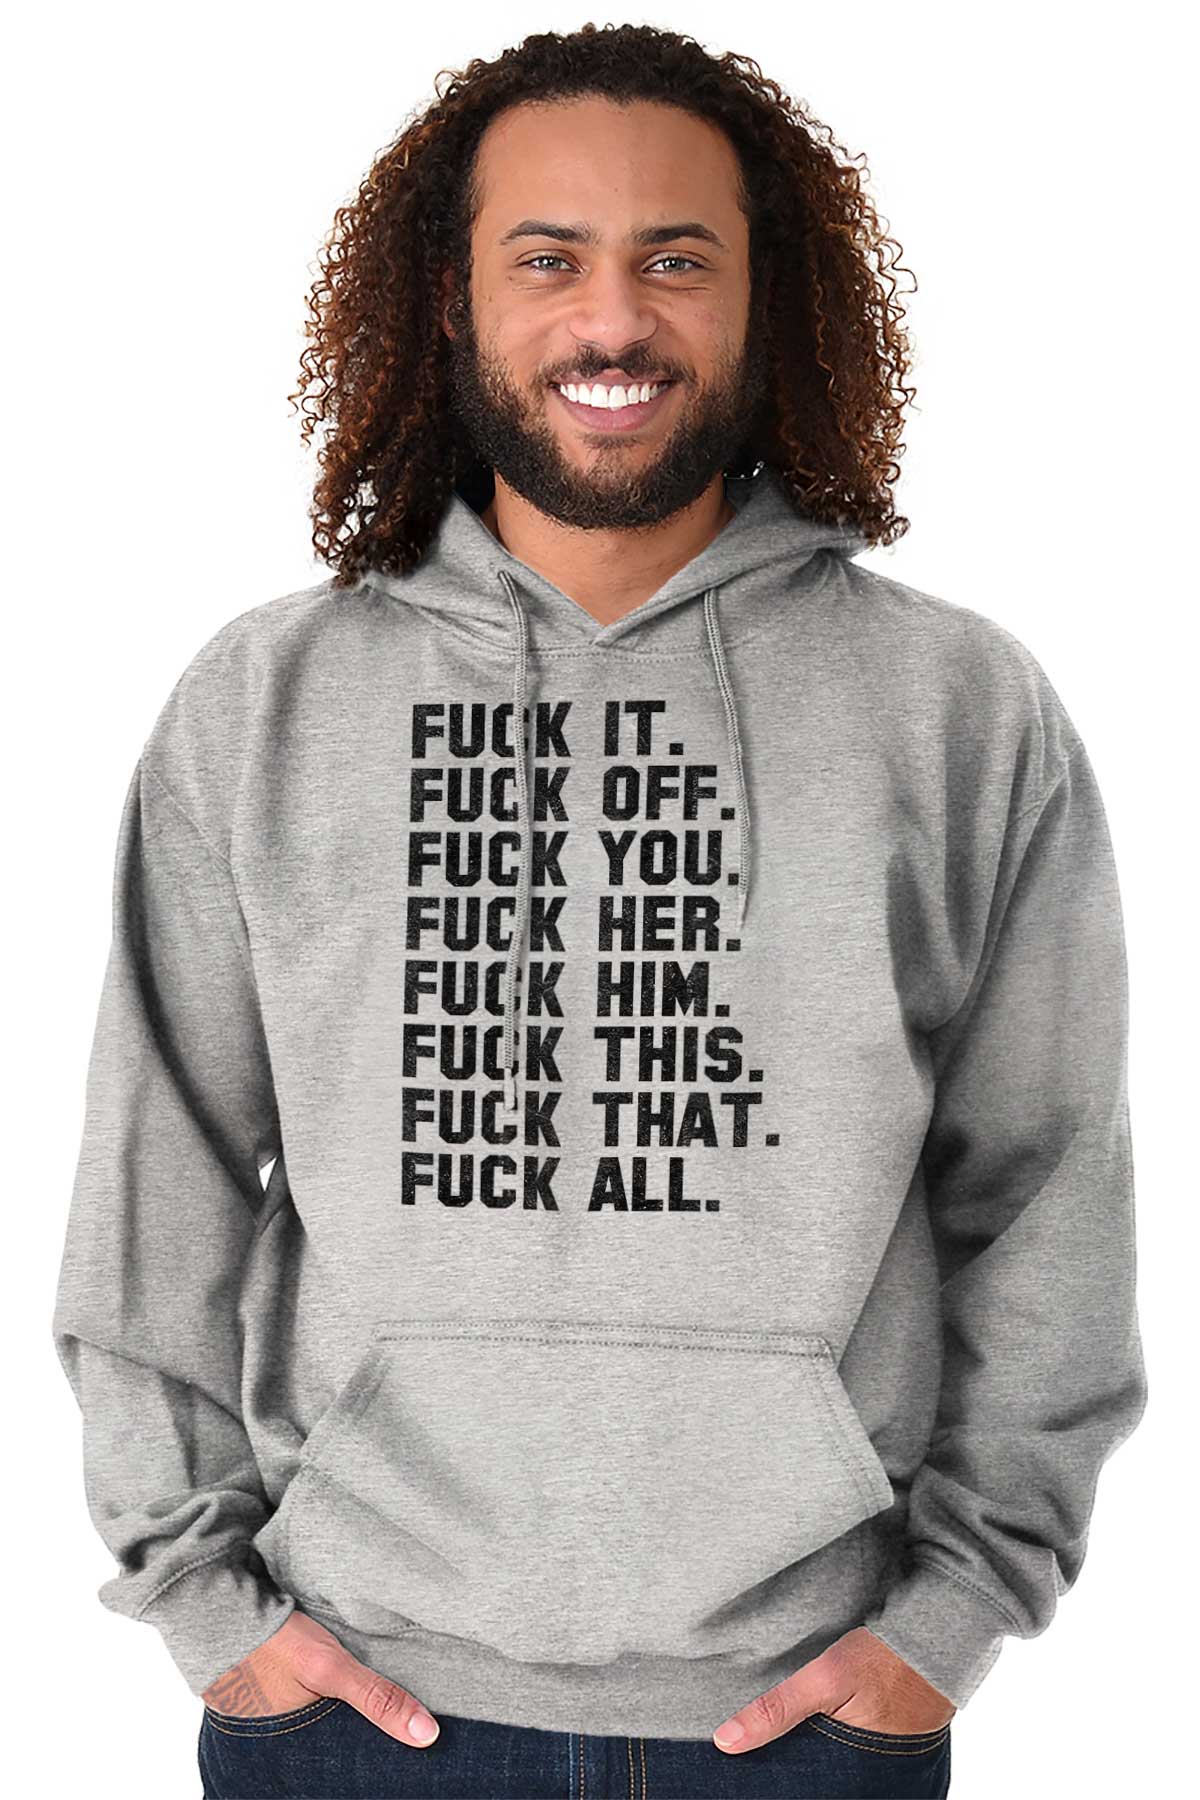 F**k It All Funny Offensive Rude Novelty Gift Hoodies Sweat Shirts ...